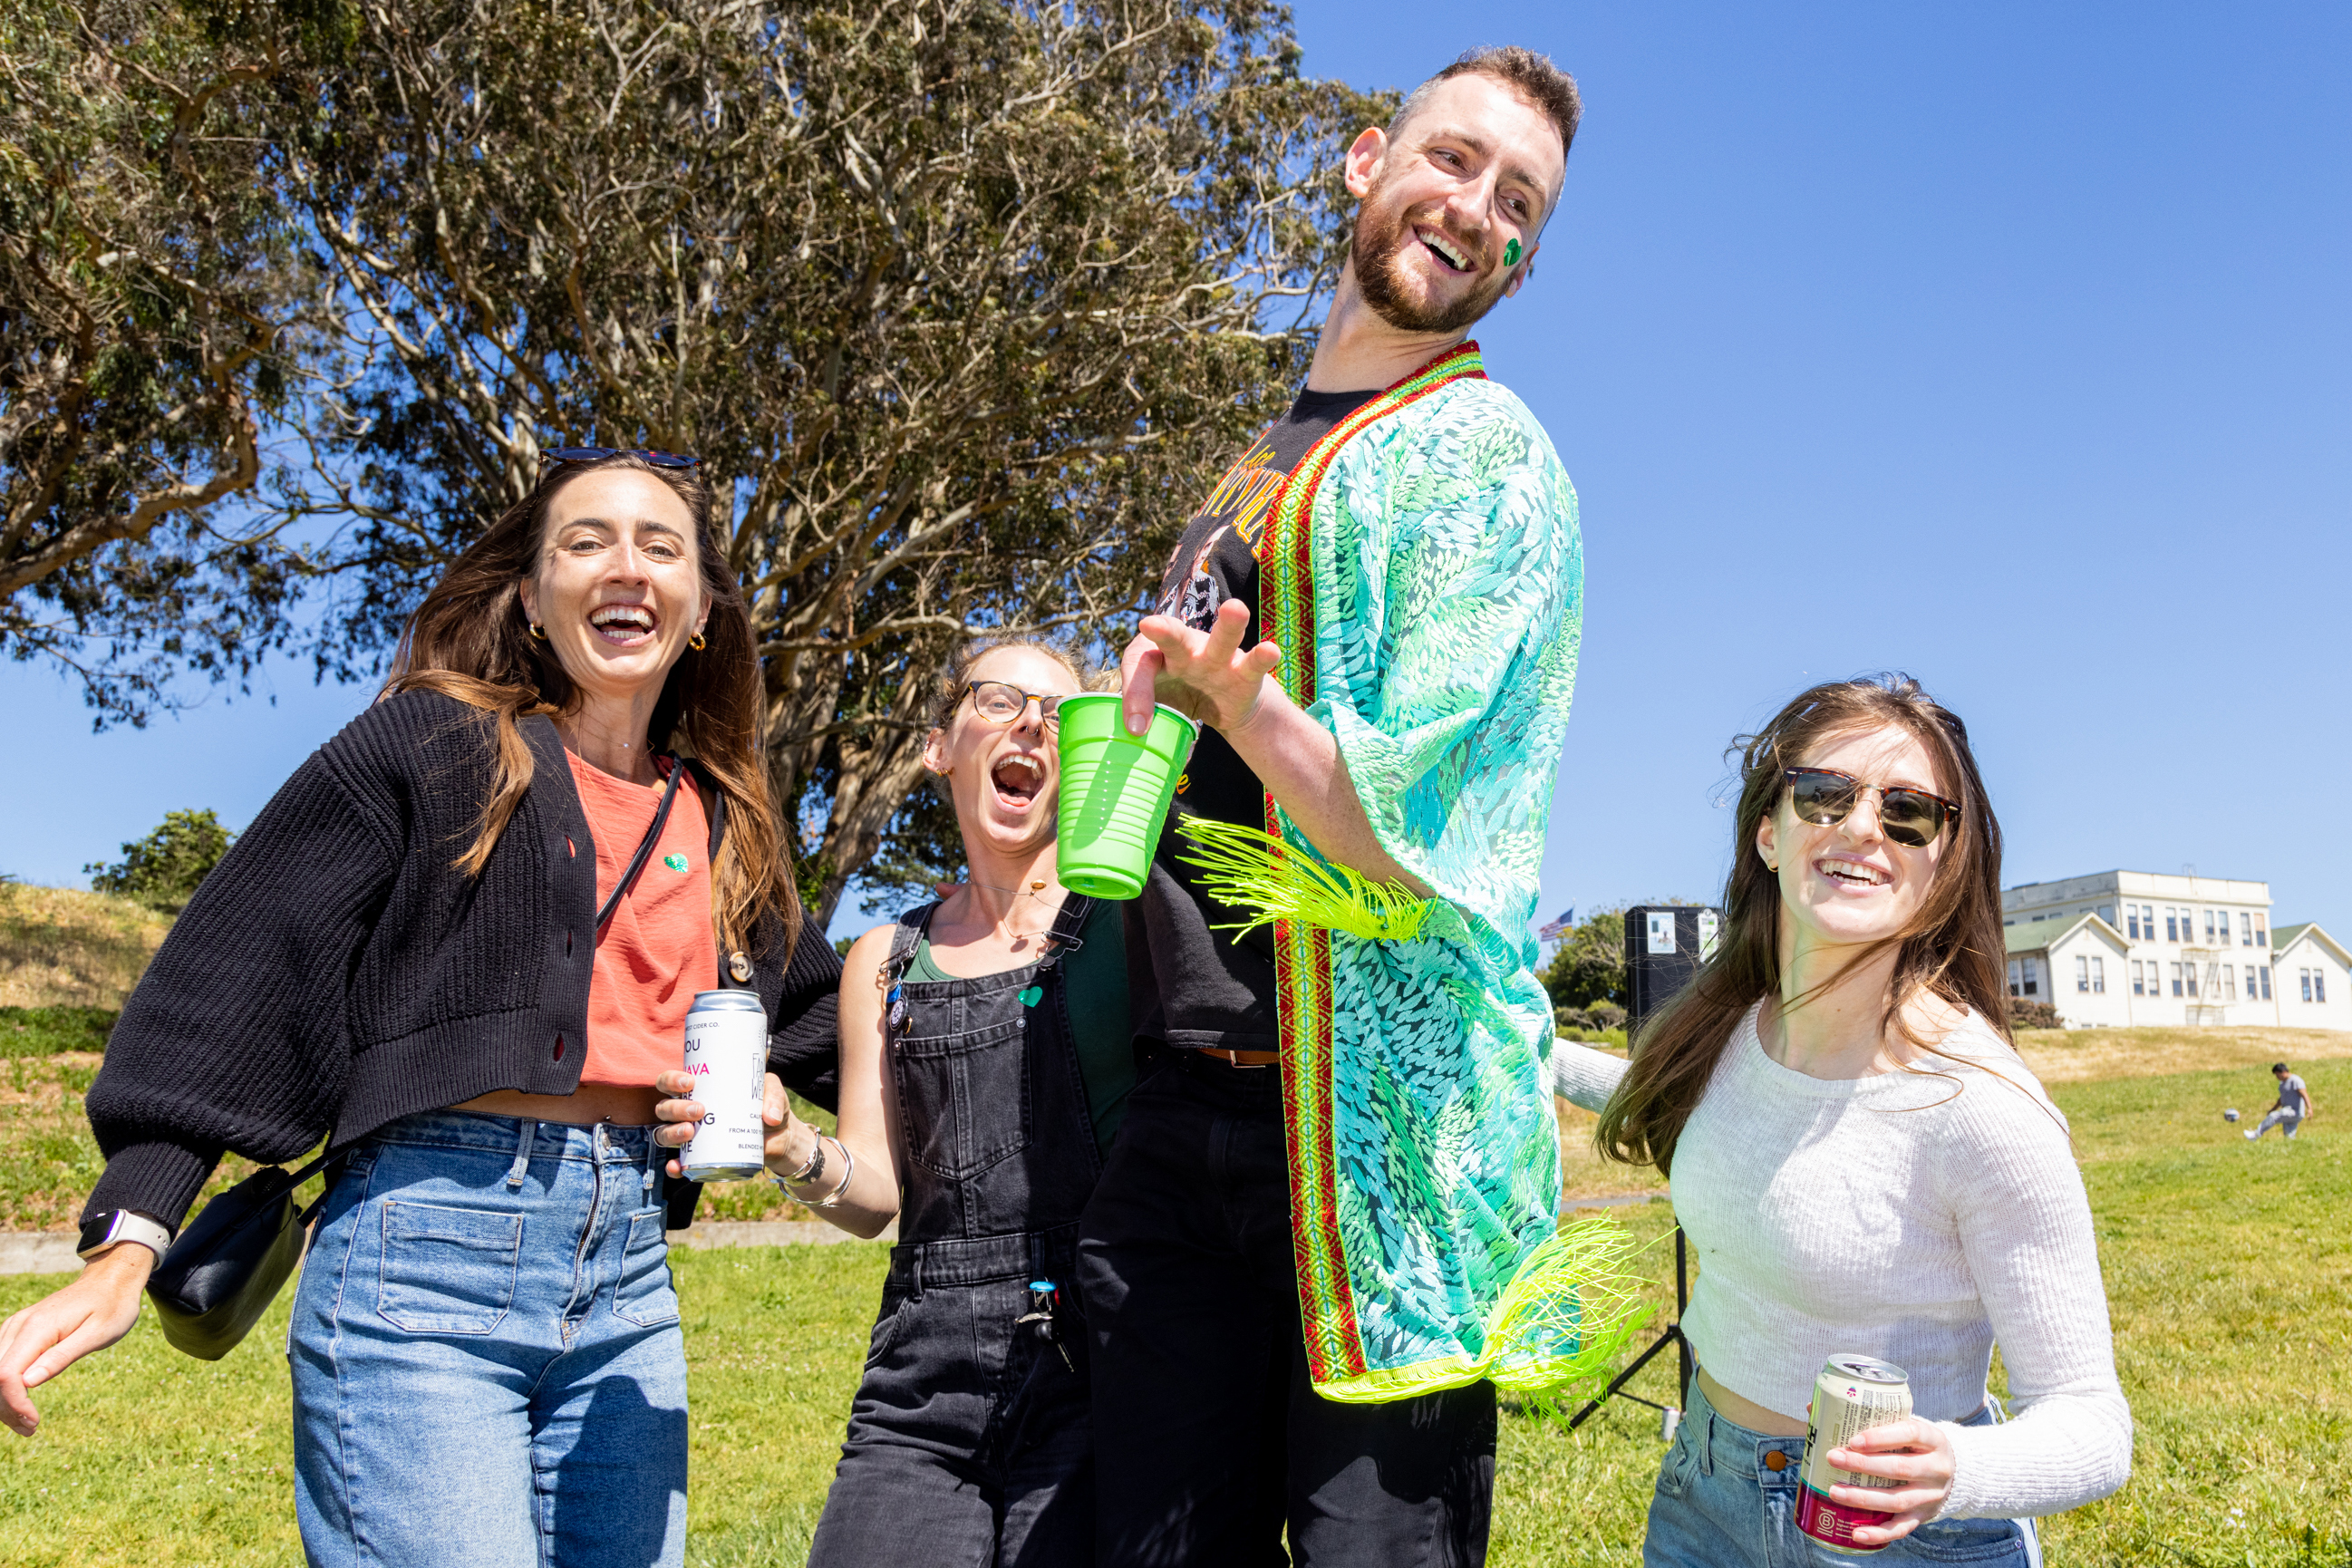 Four partygoers are laughing and enjoying a sunny day in a park, with drinks in their hands and a backdrop of lush greenery and a distant building.